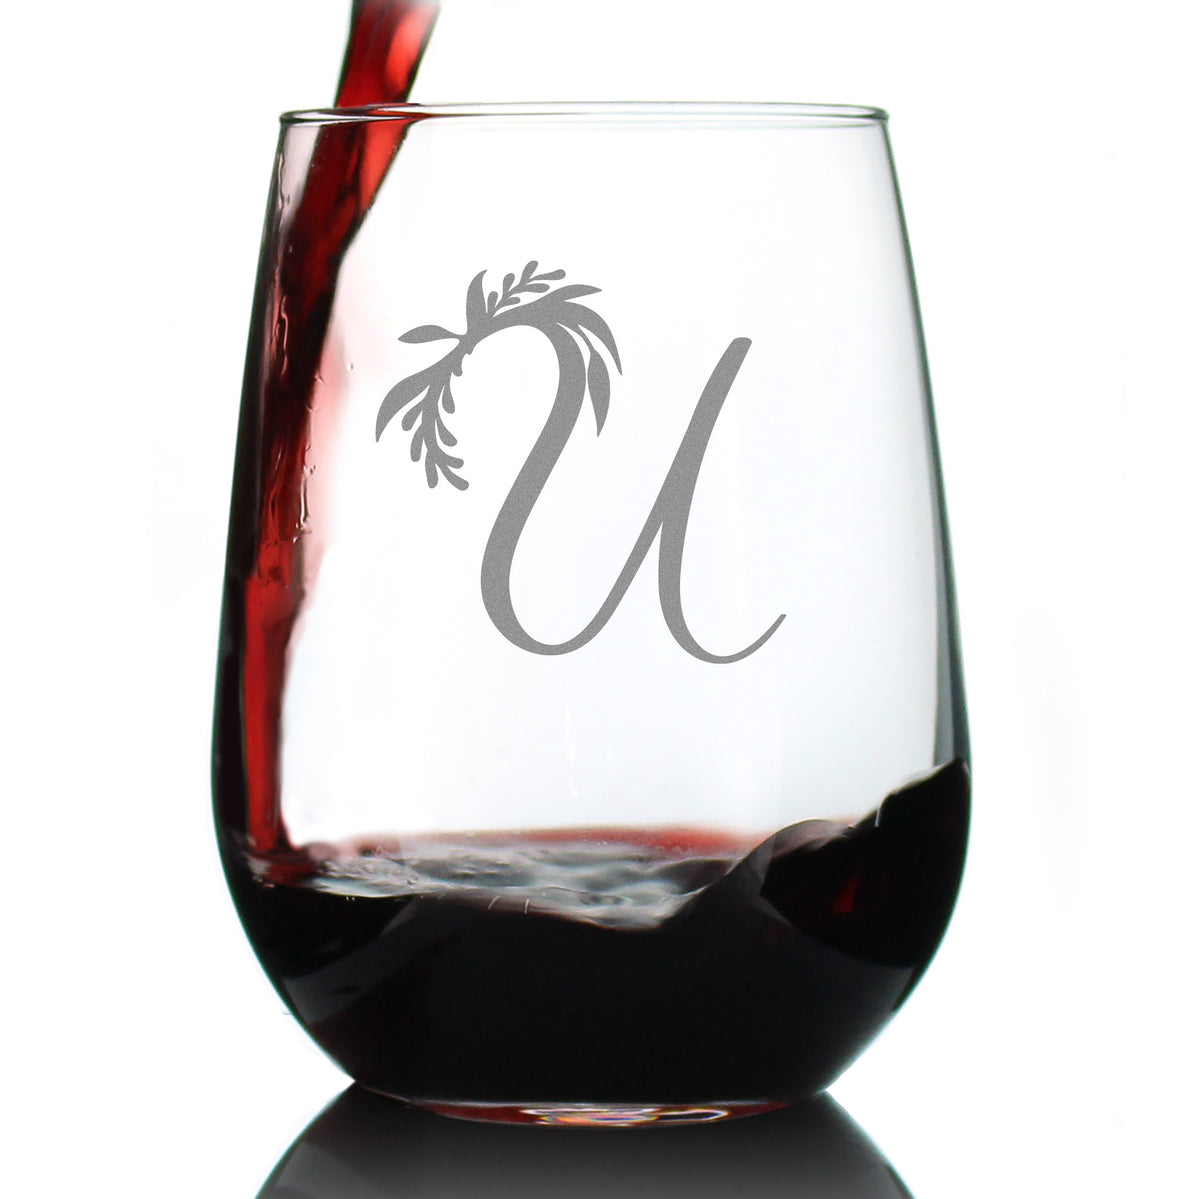 Monogram Floral Letter U - Stemless Wine Glass - Personalized Gifts for Women and Men - Large Engraved 17 Oz Glasses